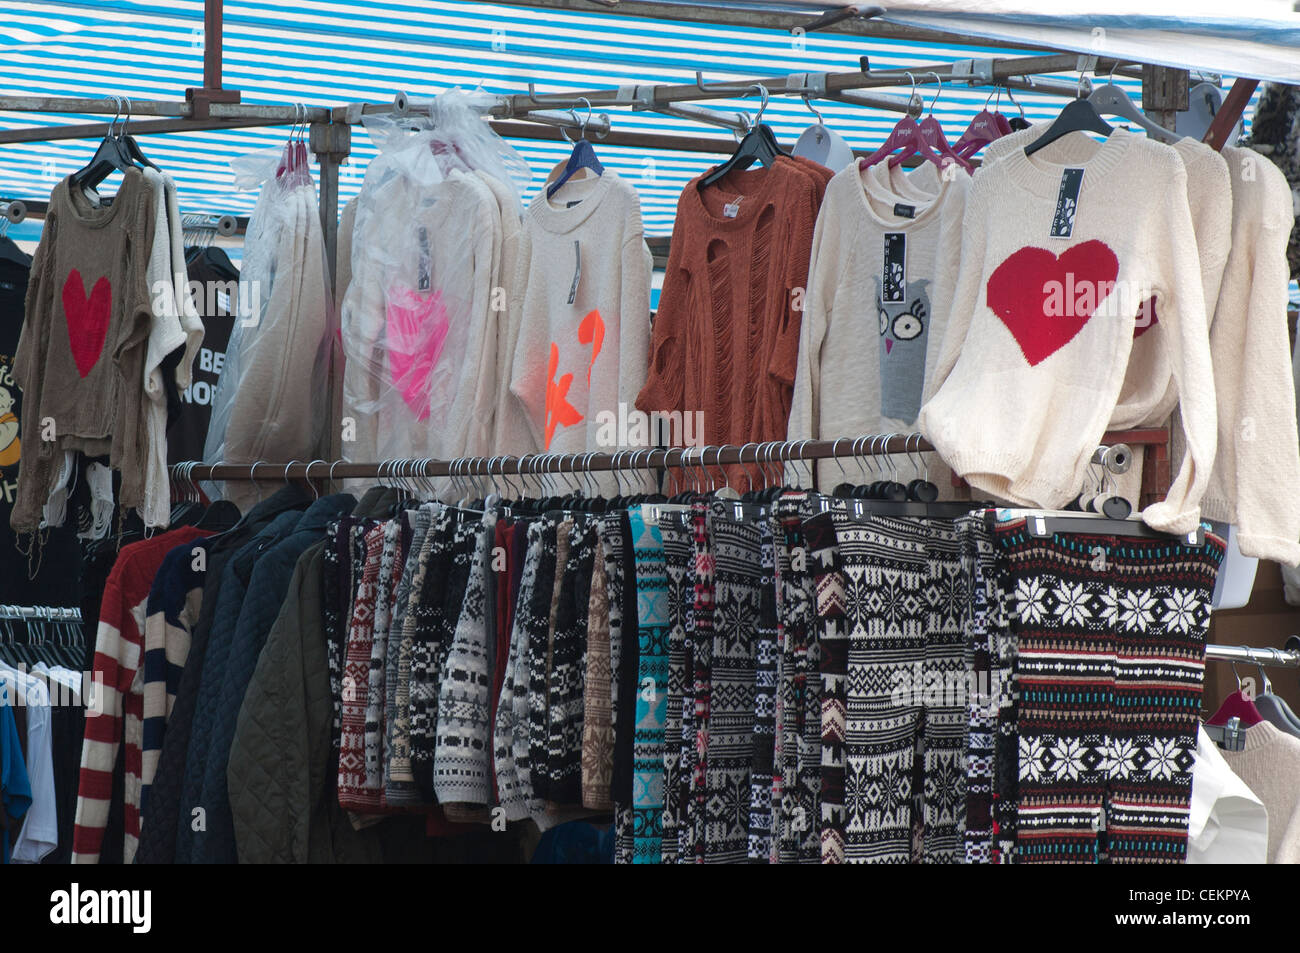 Clothes Clothing Market Stall Stock Photo